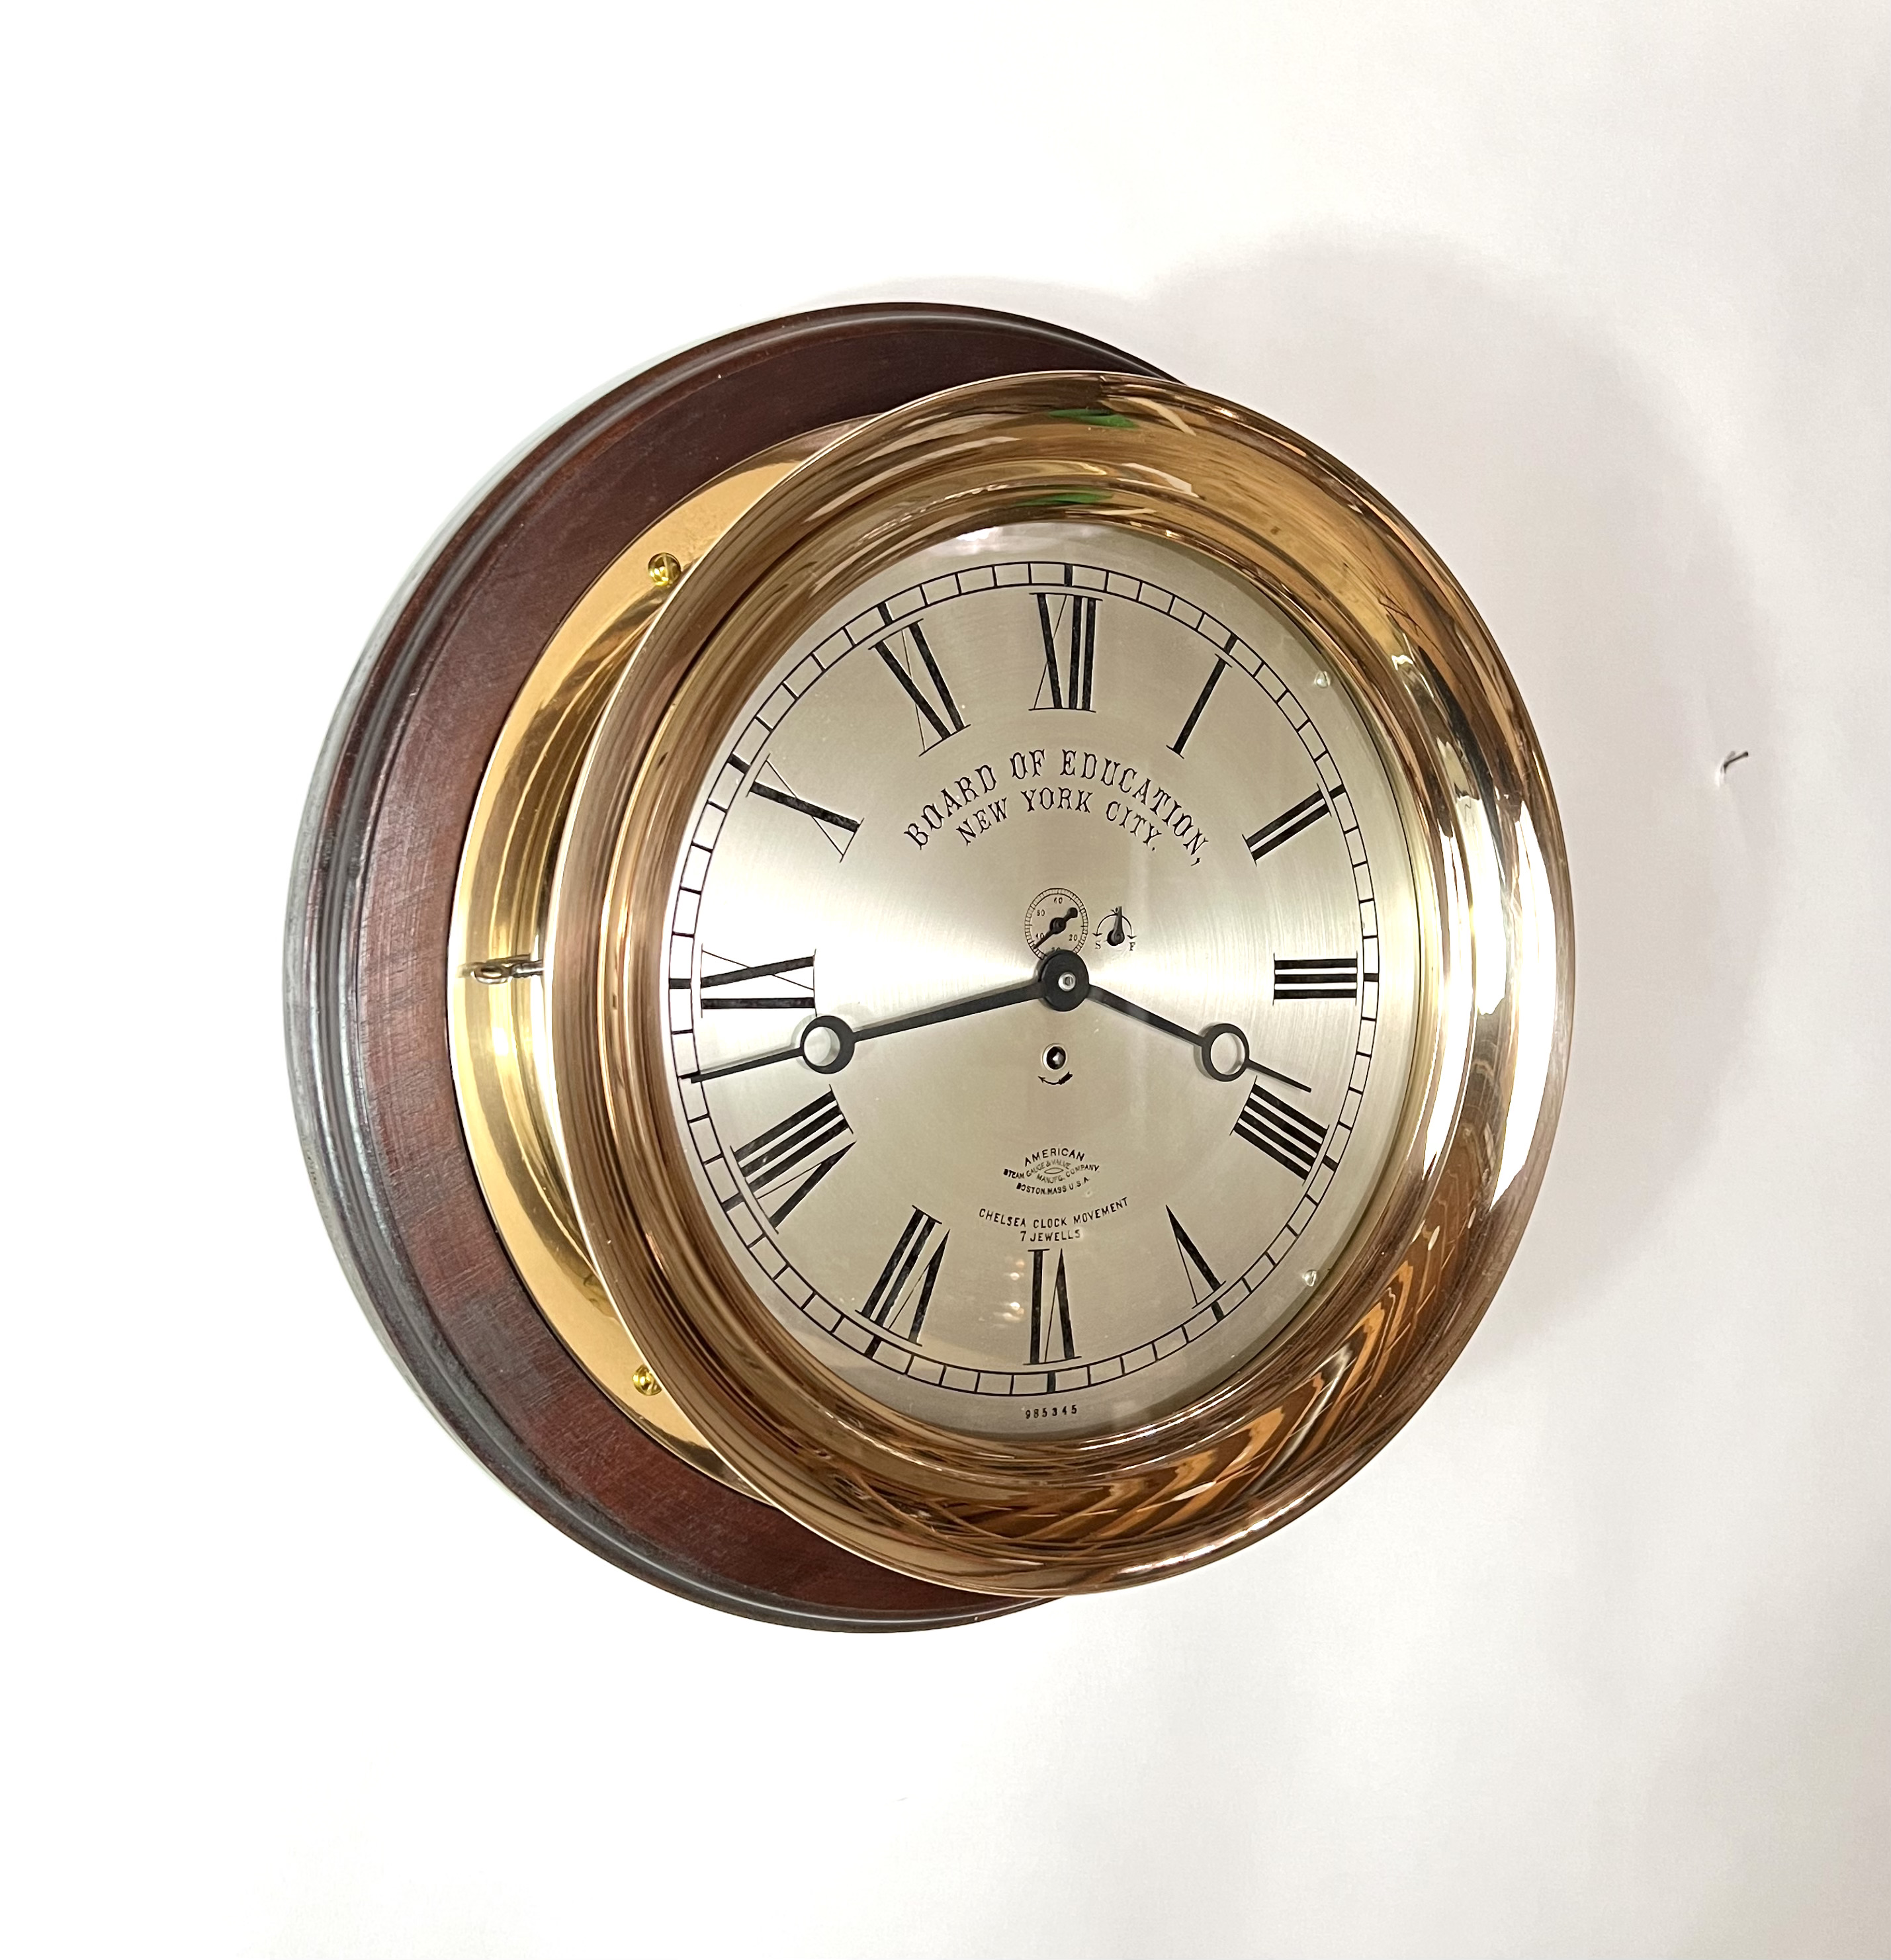 Chelsea 12" Marine Clock for NYC Board of Education